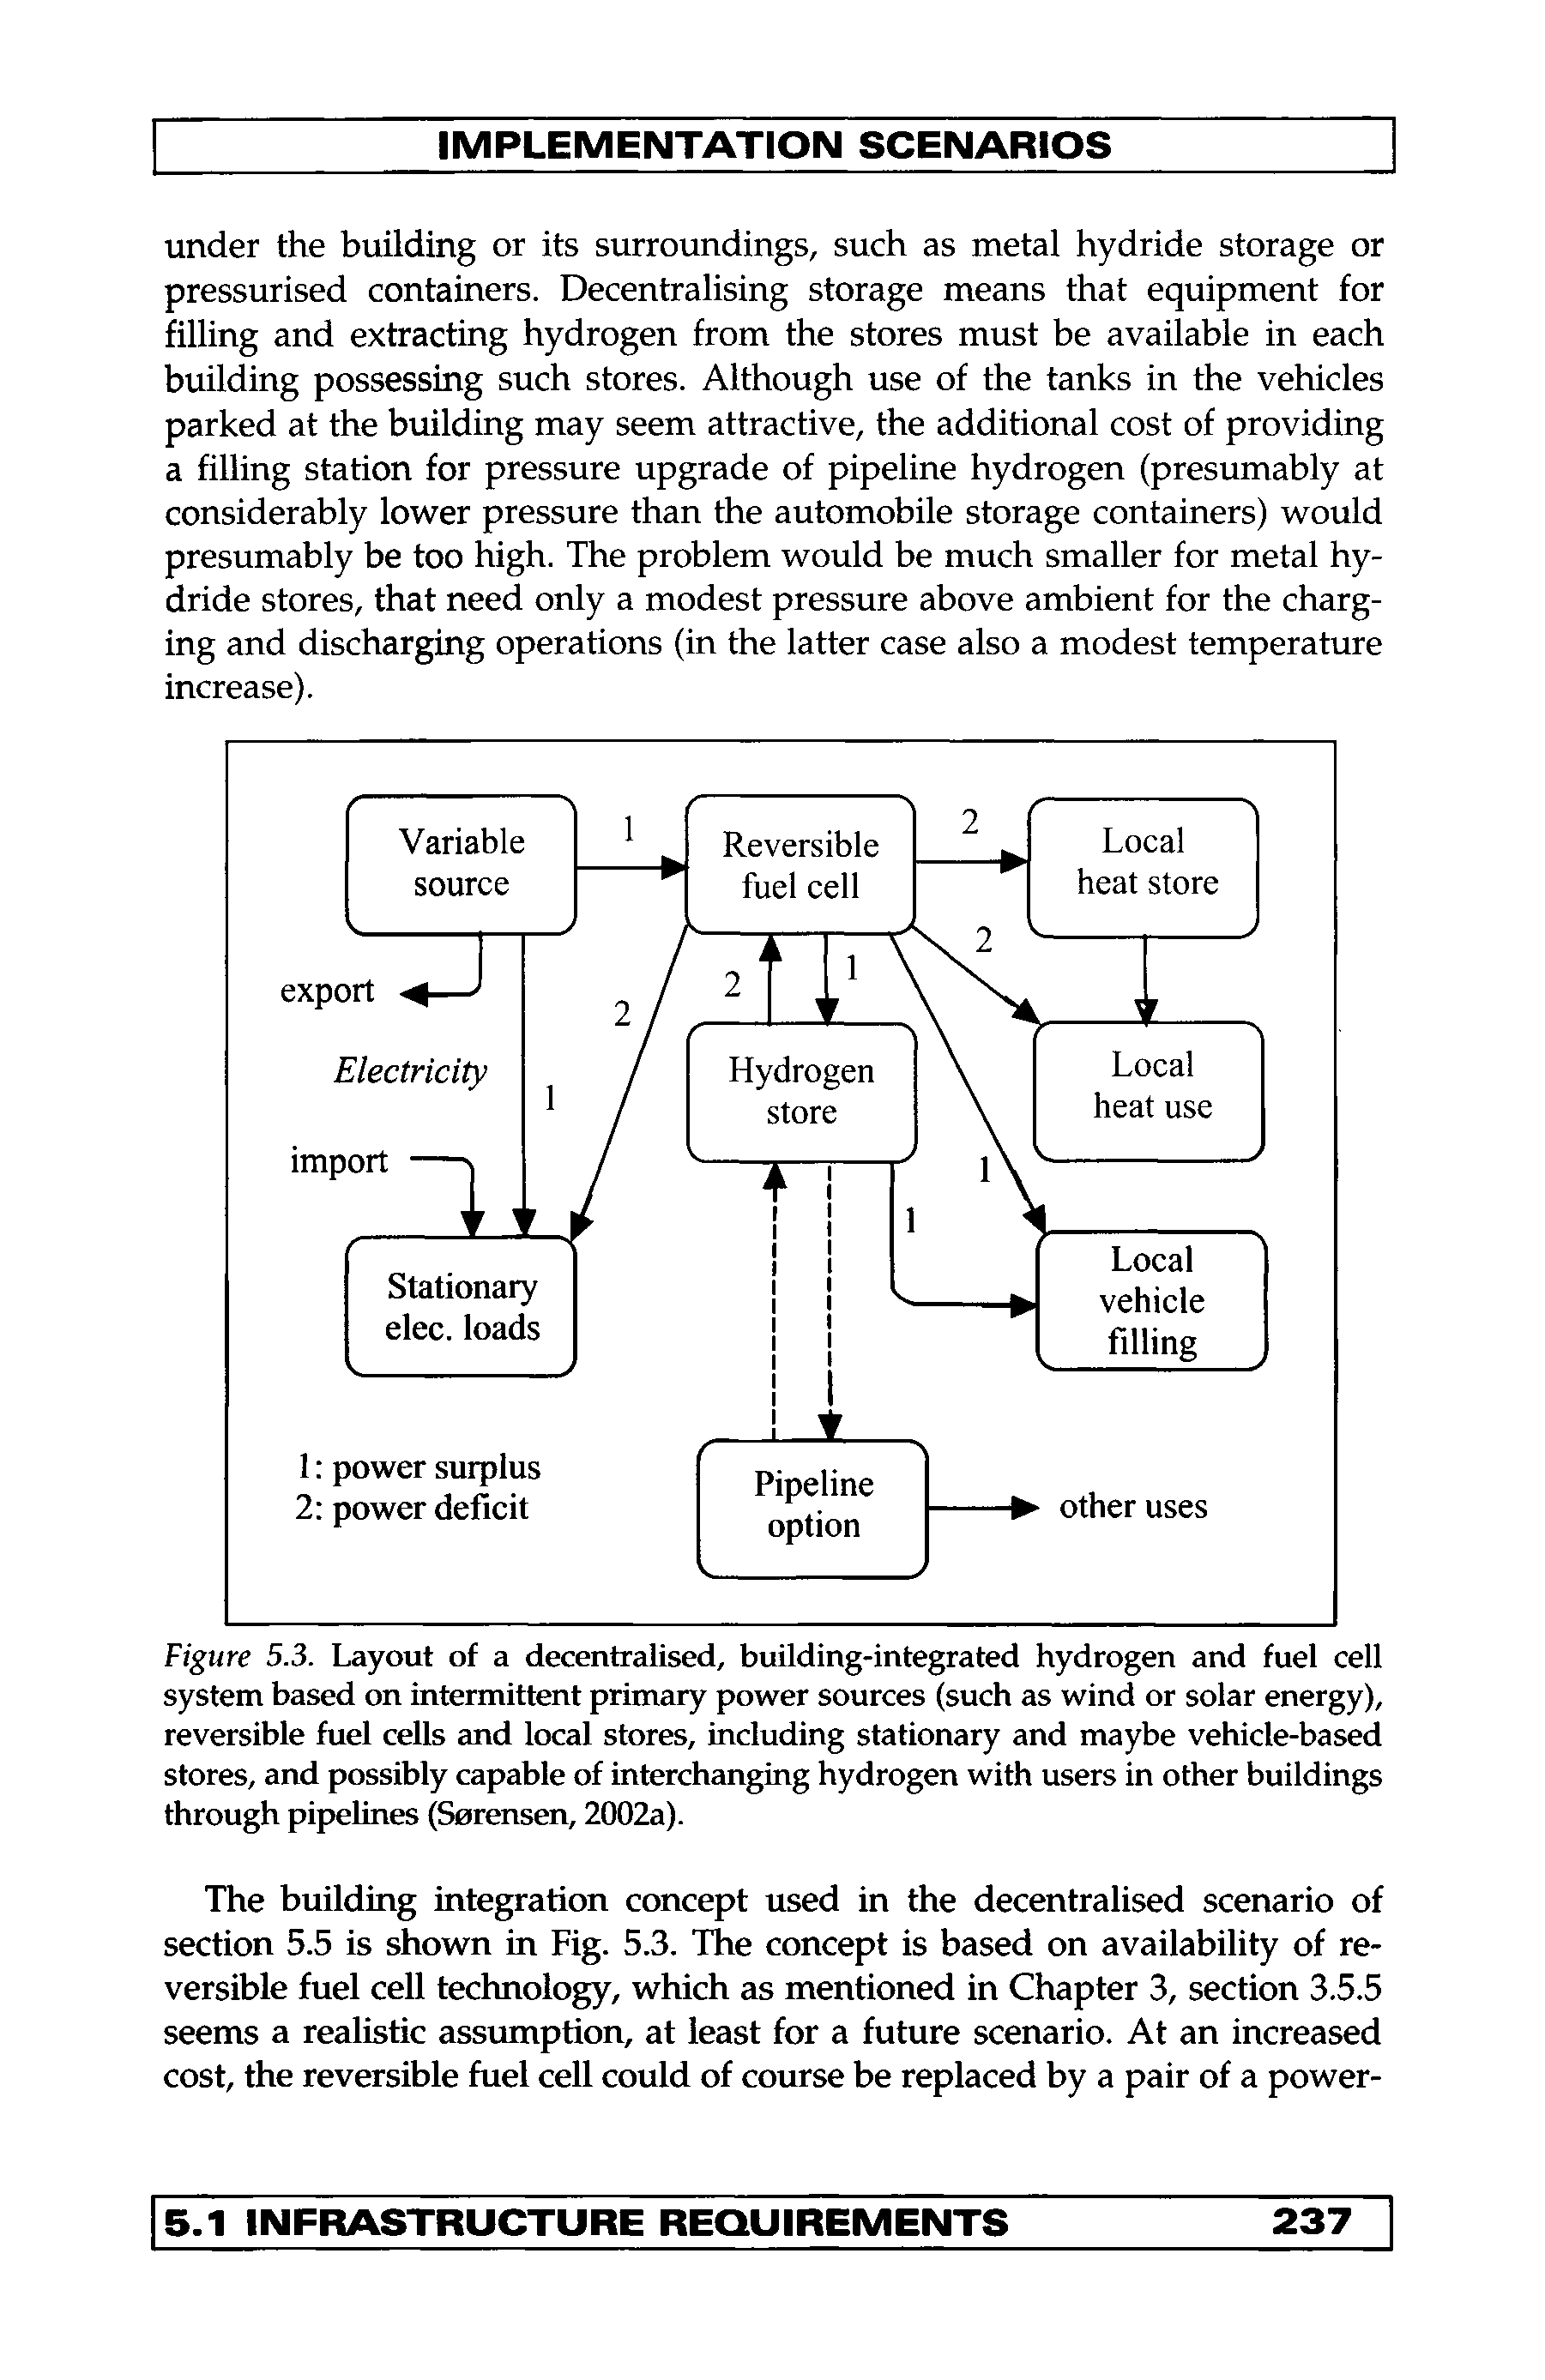 Figure 5.3. Layout of a decentralised, building-integrated hydrogen and fuel cell system based on intermittent primary power sources (such as wind or solar energy), reversible fuel cells and local stores, including stationary and maybe vehicle-based stores, and possibly capable of interchanging hydrogen with users in other buildings through pipelines (Sorensen, 2002a).